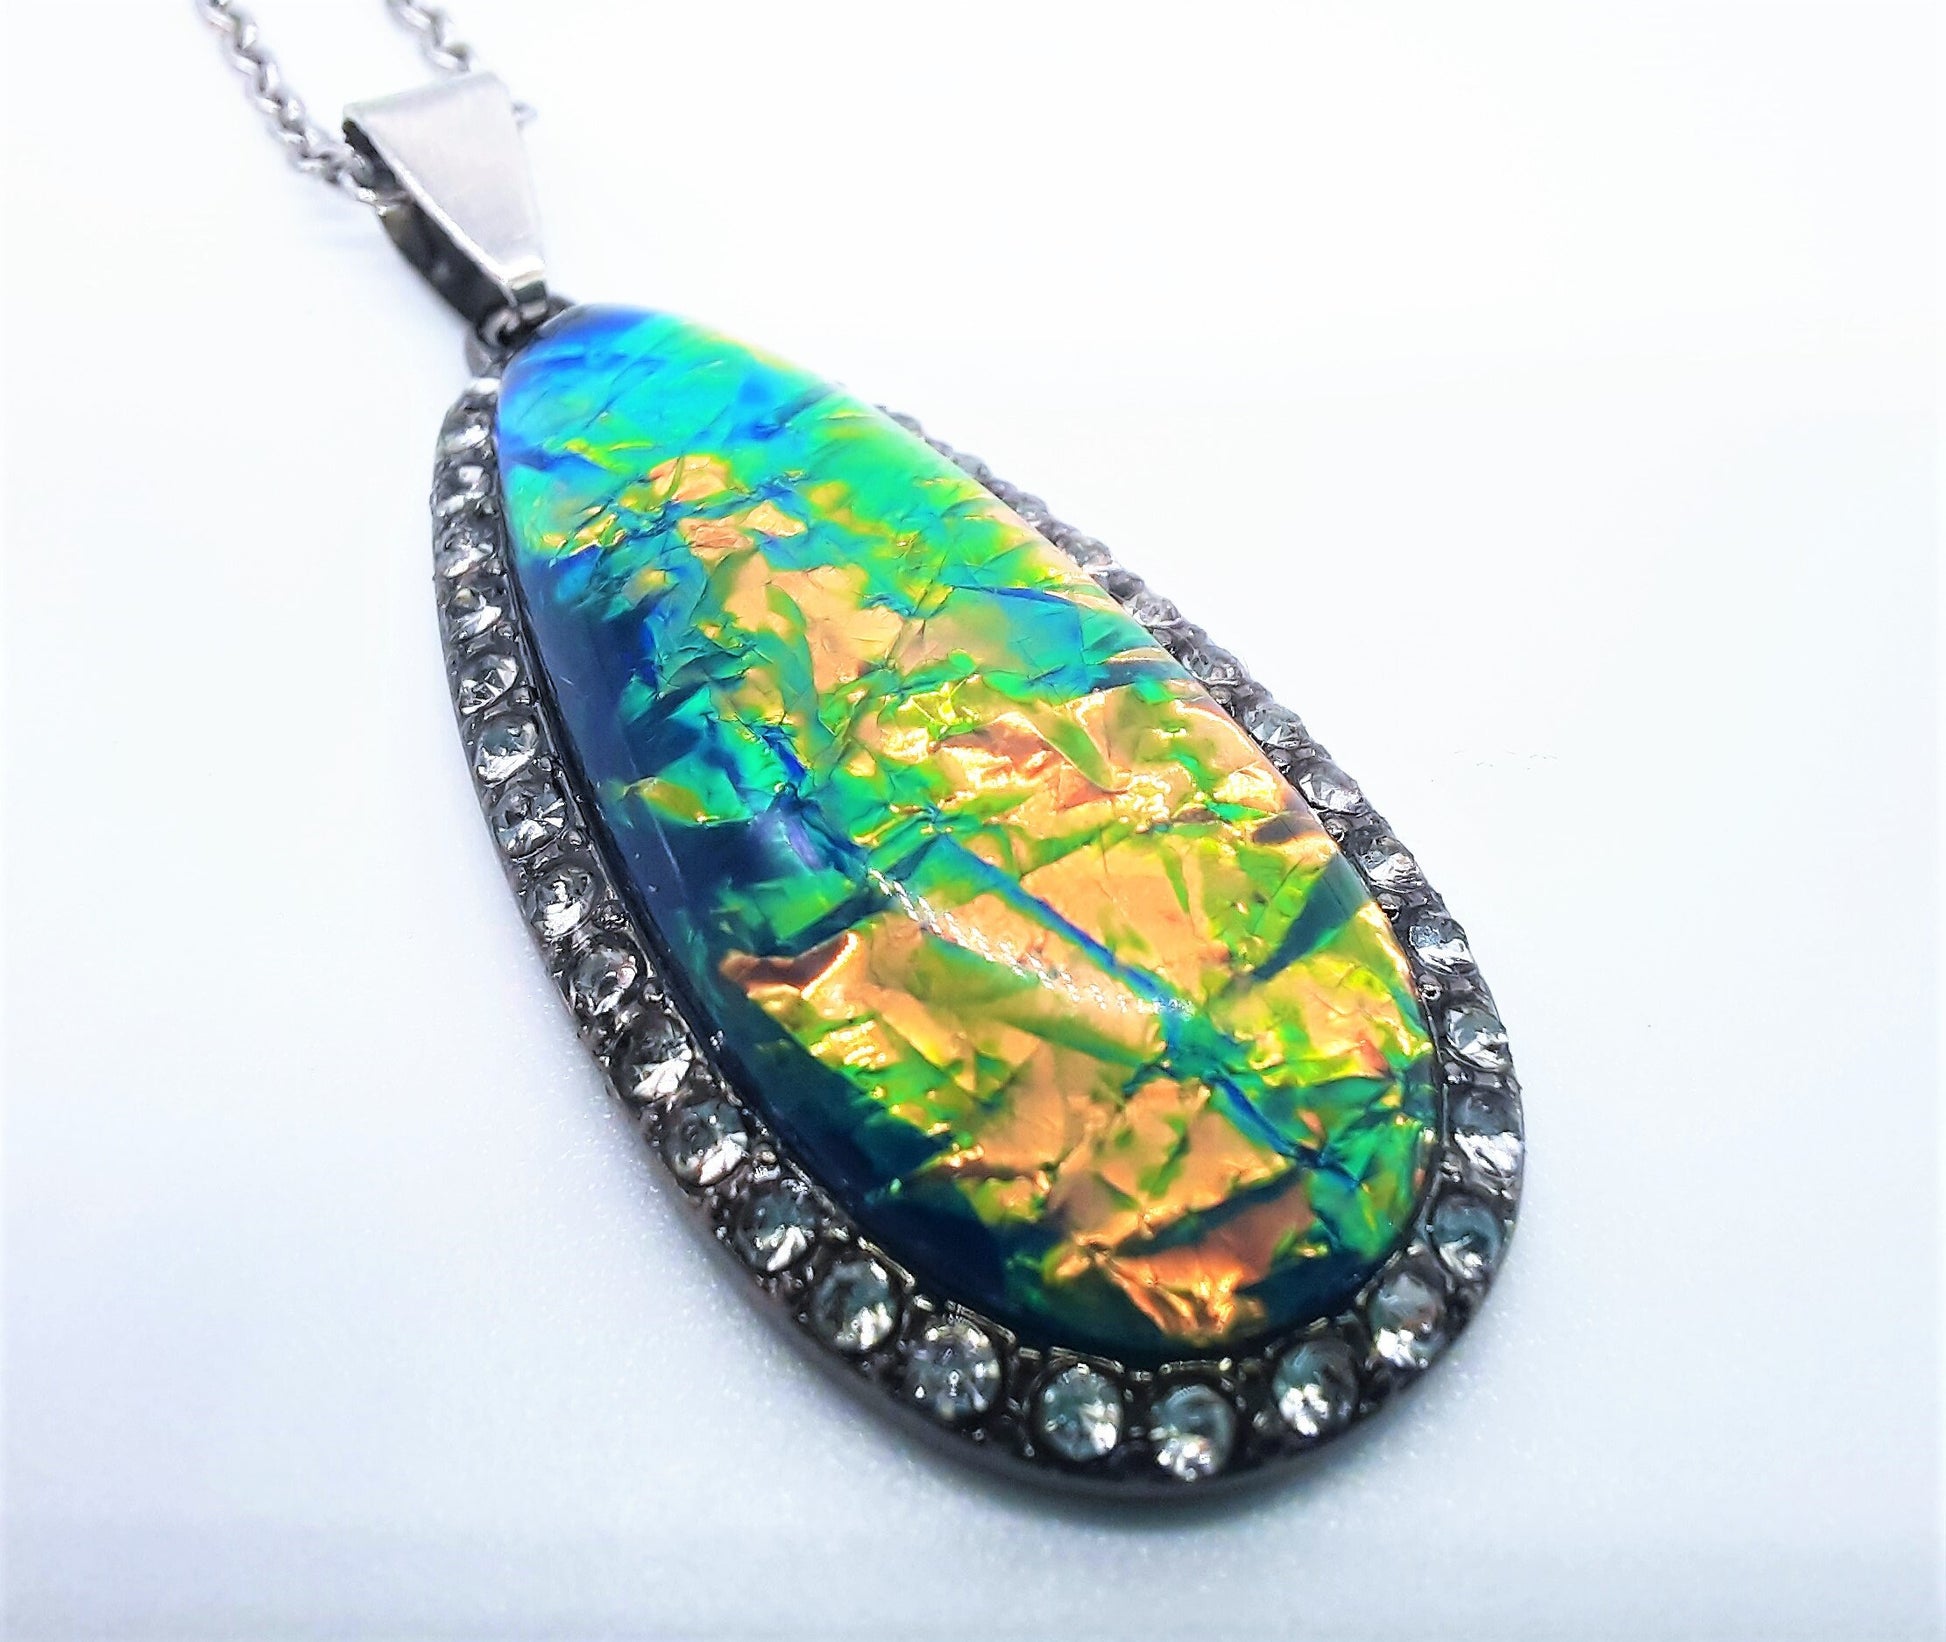 Translucent Glittery Opal (like) Blue Green Teardrop Pendant Necklace - Stainless Steel Chain- Hypoallergenic - Glass Cabochon